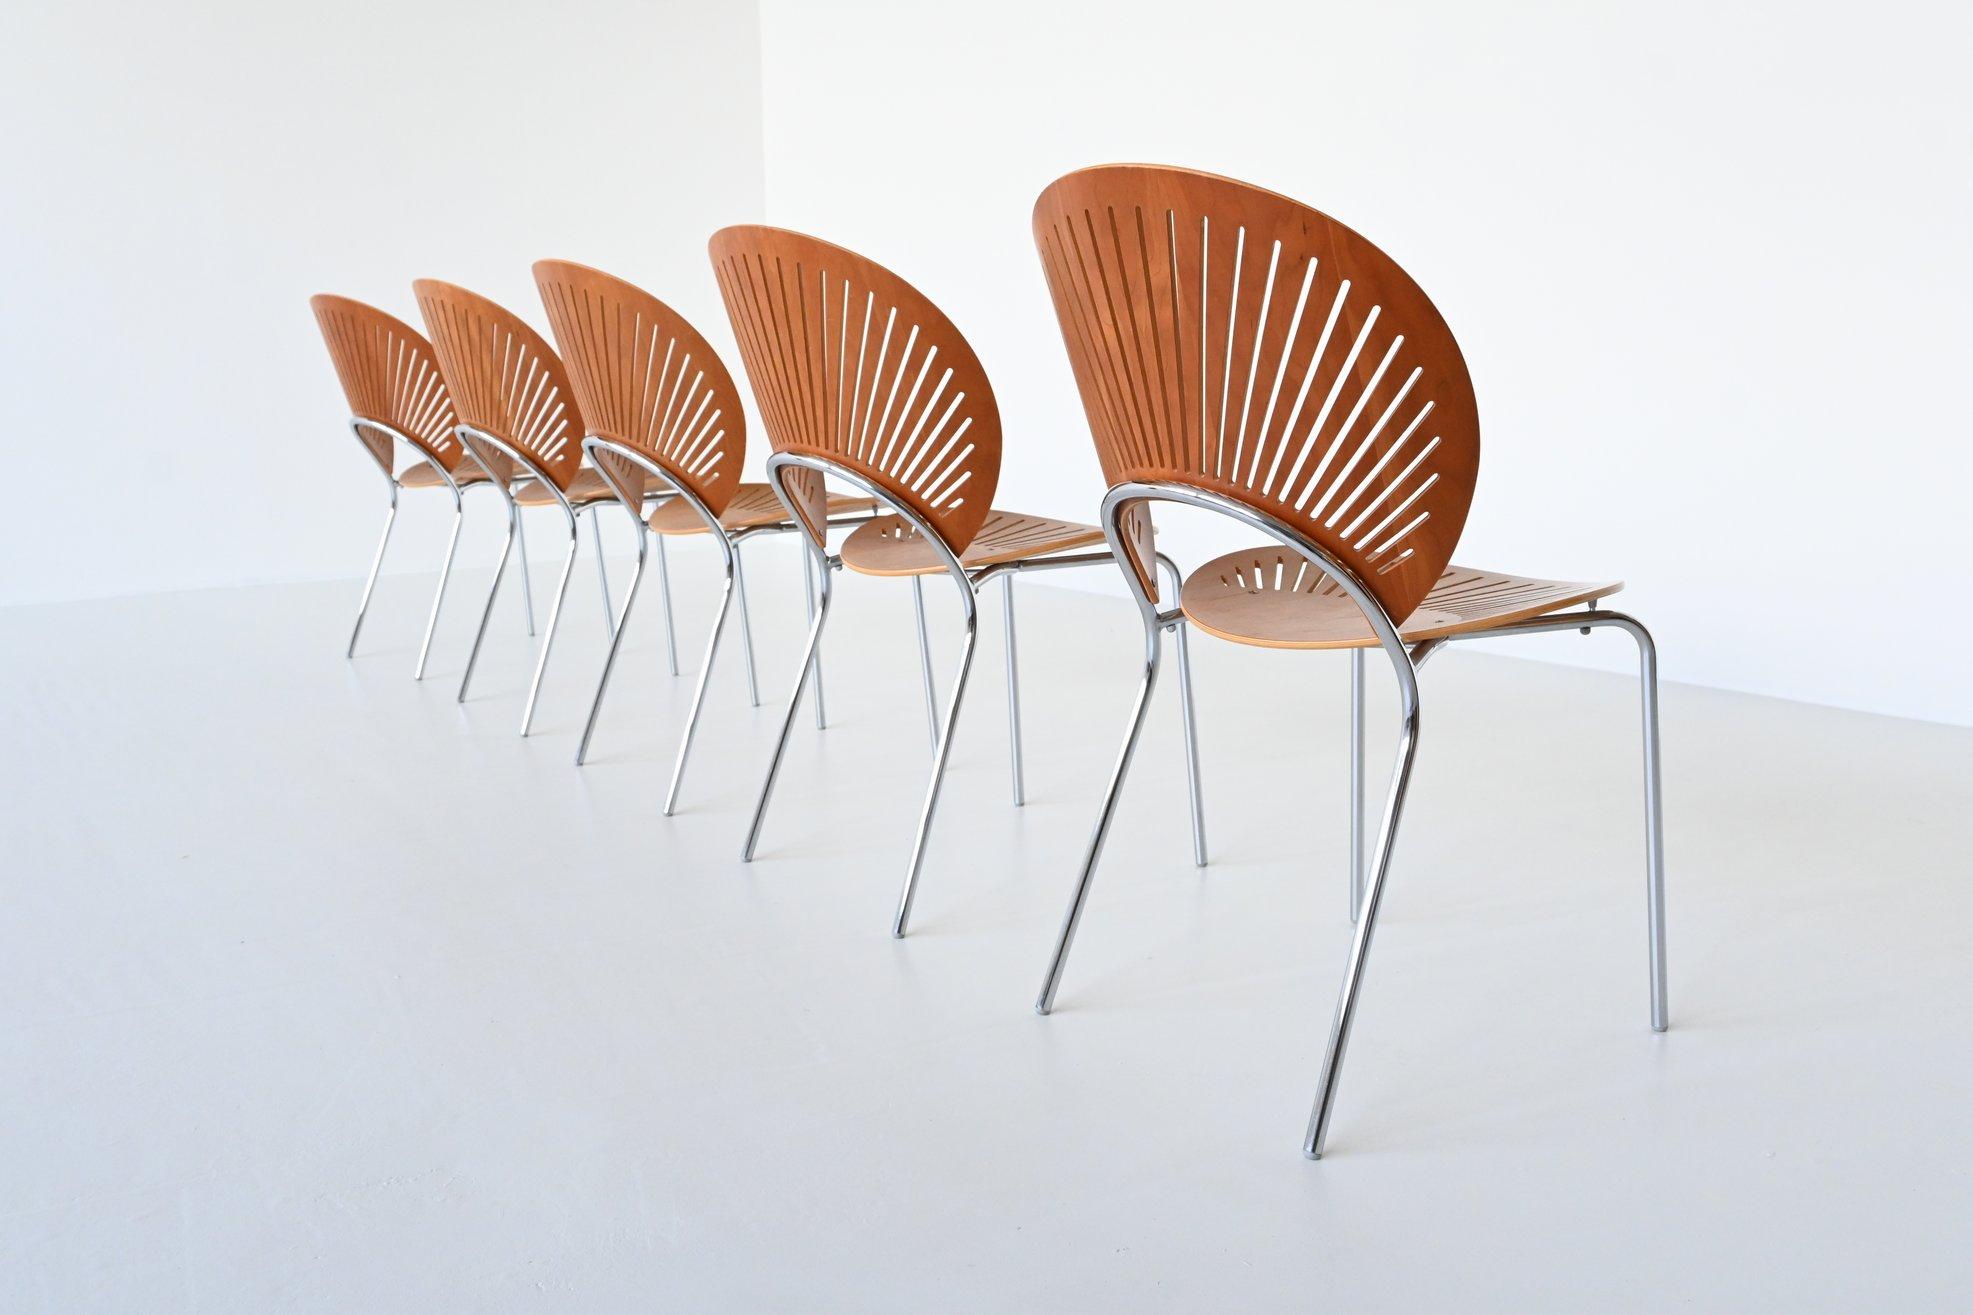 Very nice set of five Trinidad dining chairs model 3298 designed by Nanna Ditzel for Fredericia Stolefabrik, Denmark 1990. These beautiful shaped dining chairs have shells of beech wood with a chrome plated tubular metal frame. The design is defined